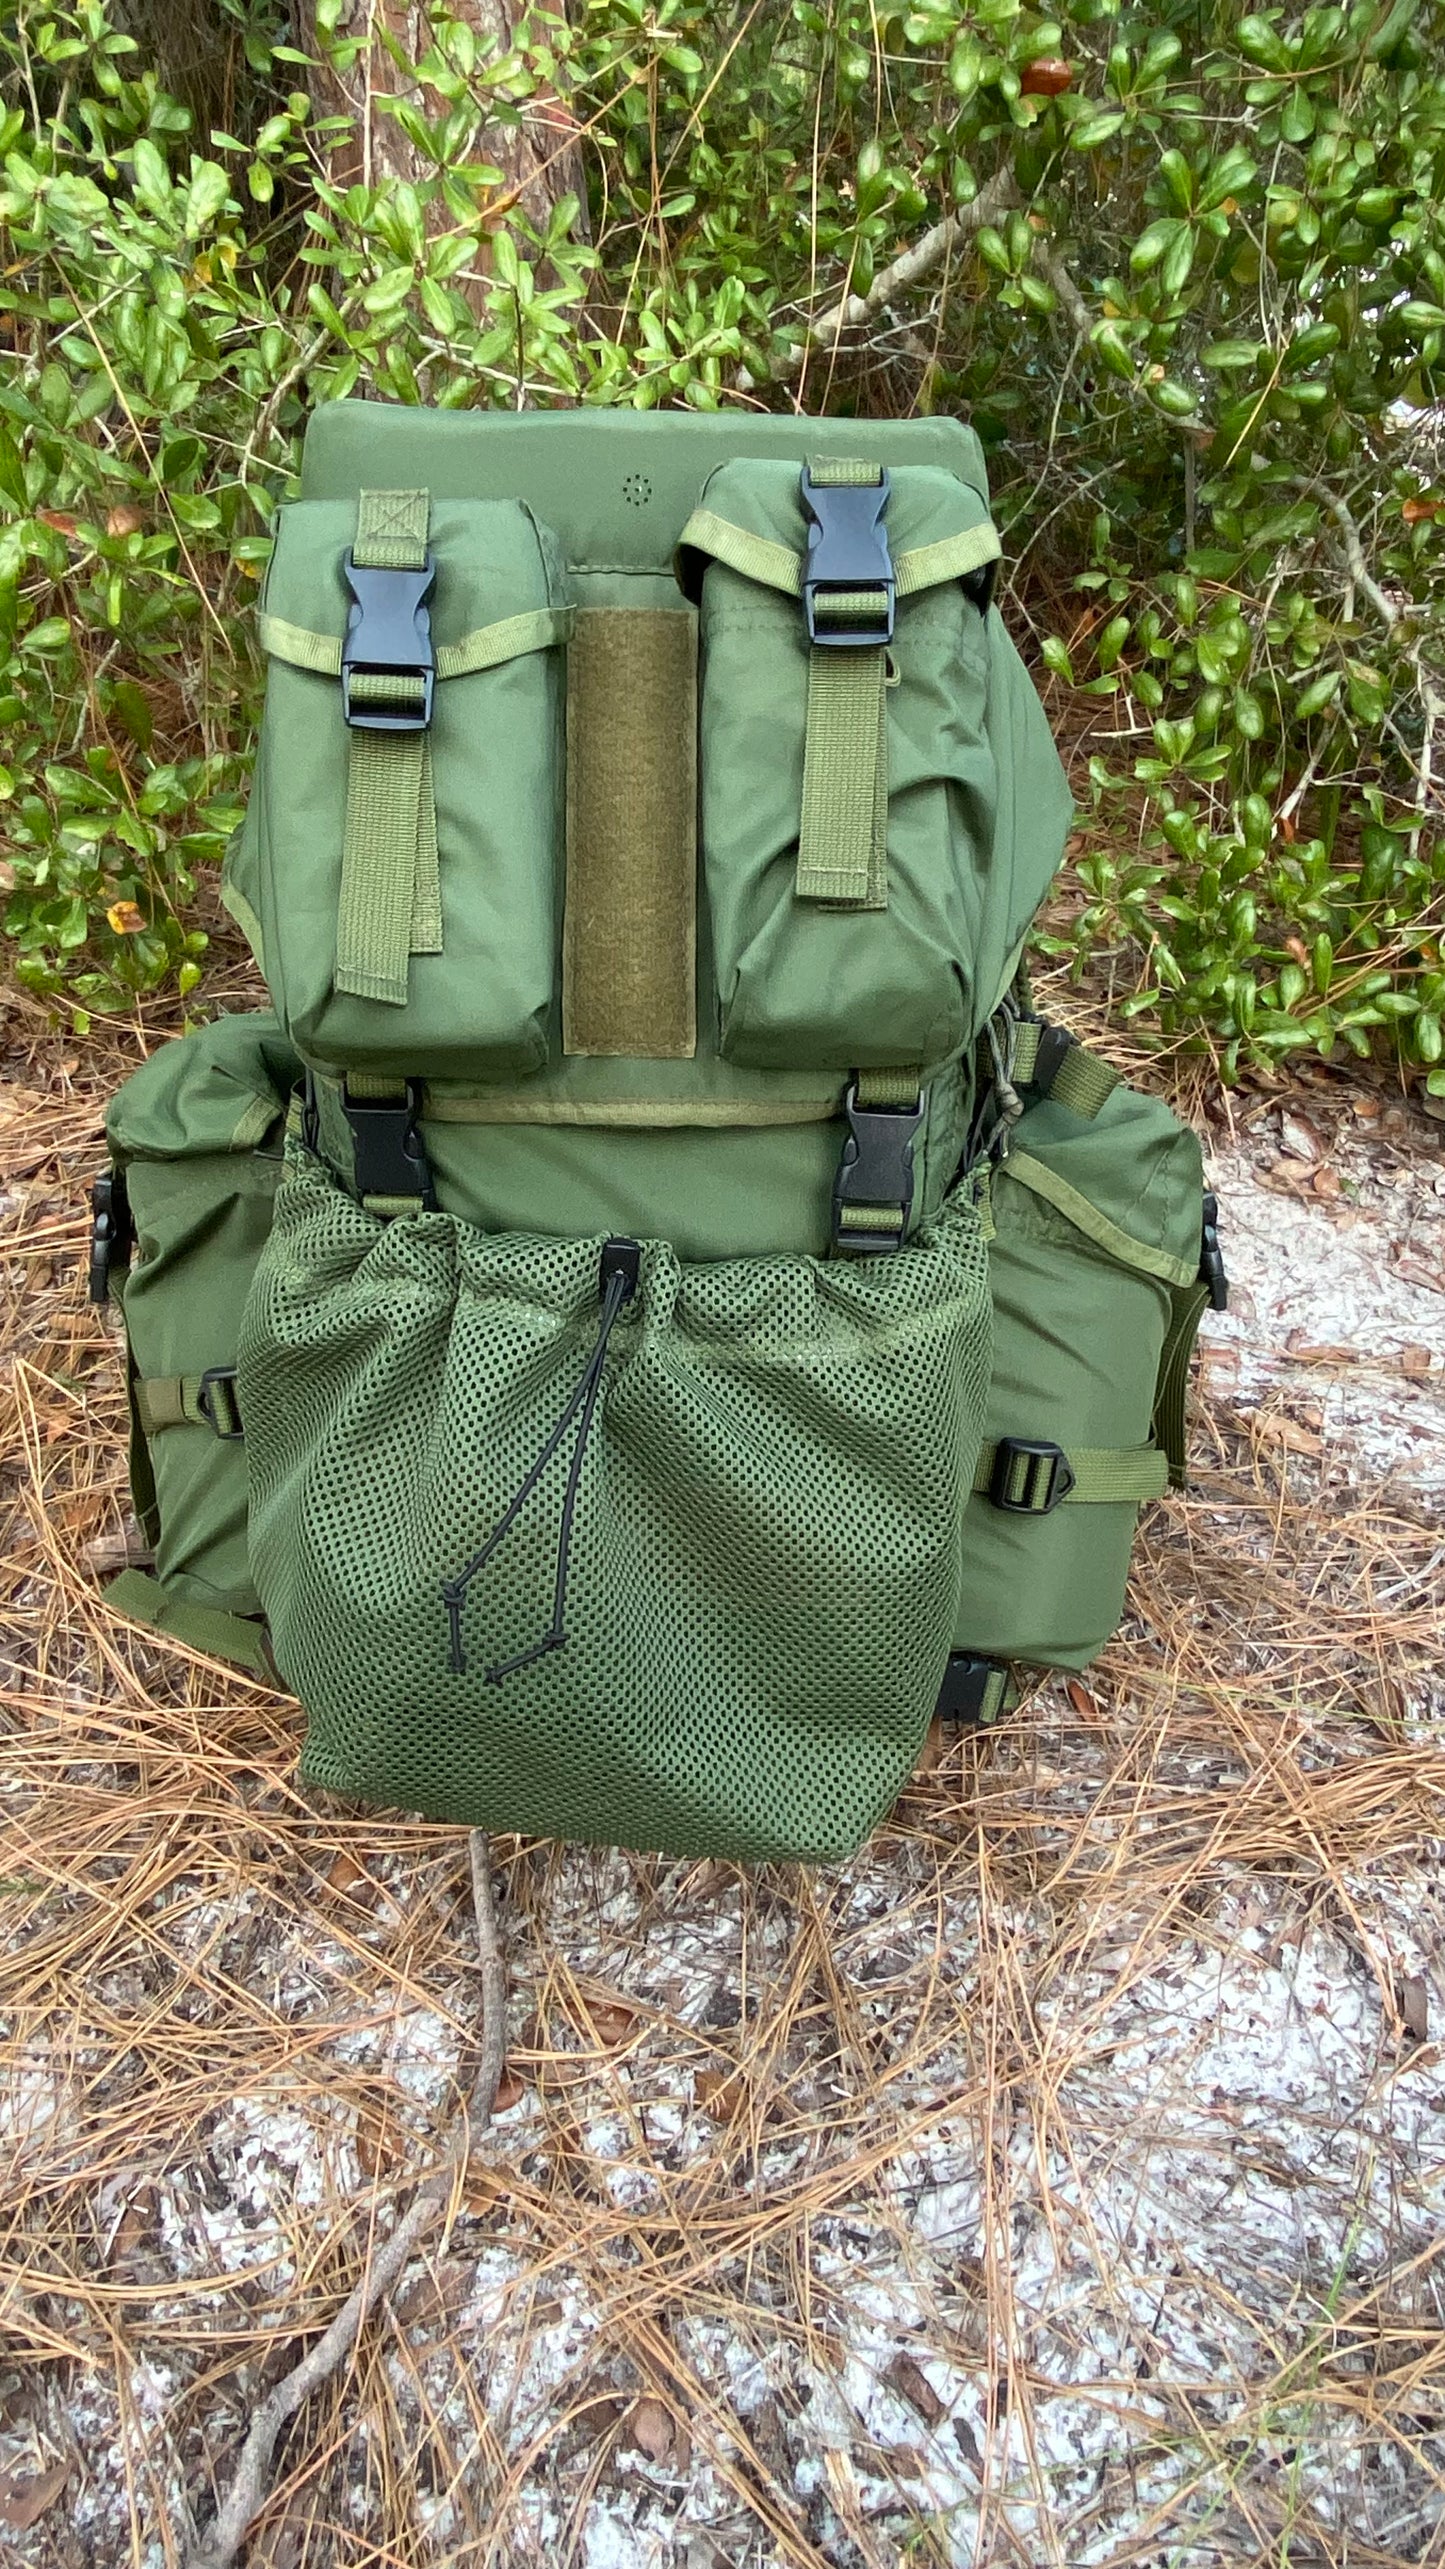 "Pack Sack" Clip-on Mesh Outside Pocket. Free Shipping! (U.S.A. only)